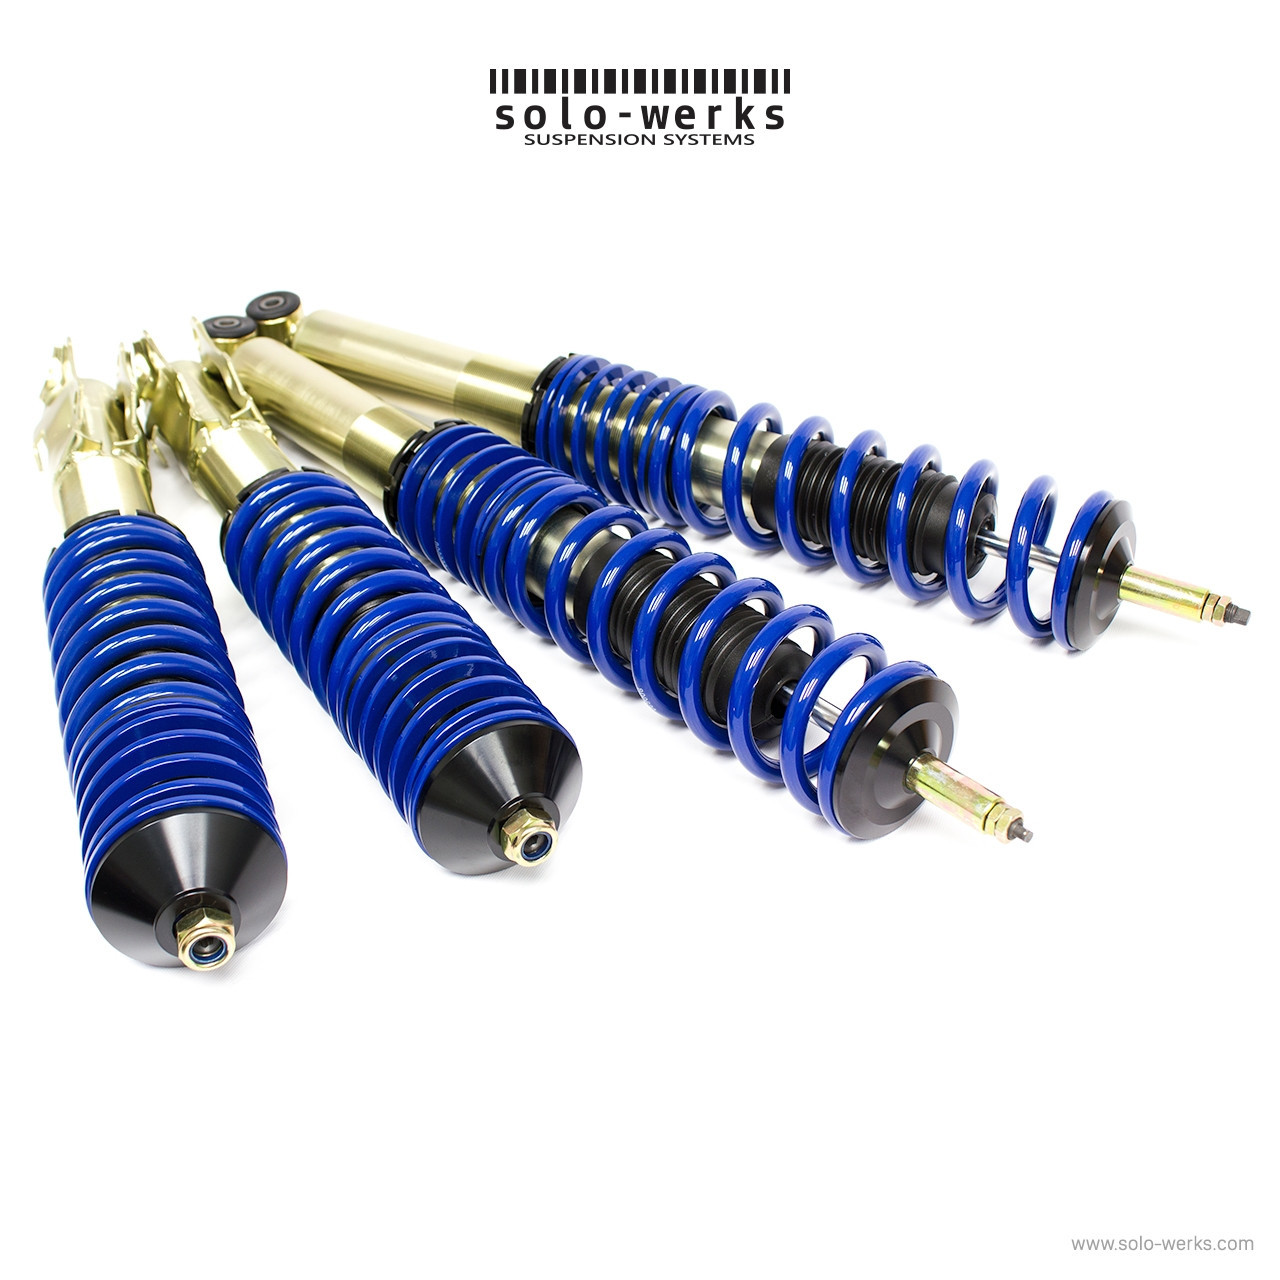 Solo-Werks S1 Coilovers for MK2, MK3, B3 & B4